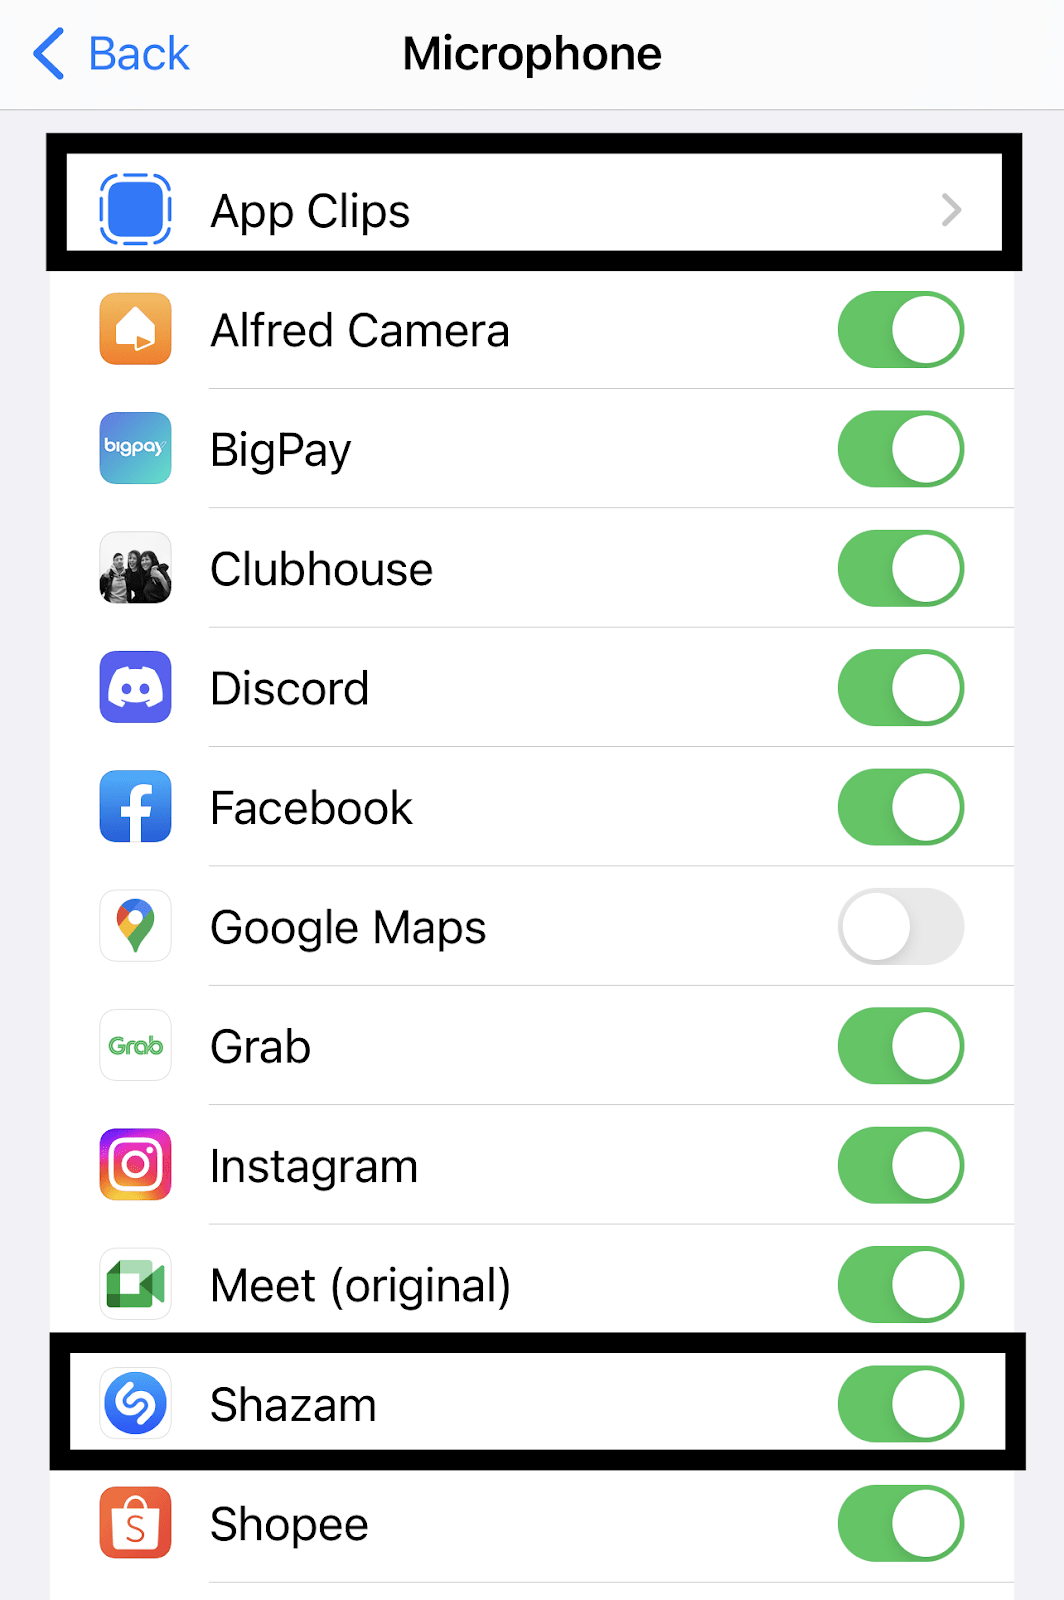 allow microphone access permission to Shazam app on iOS to fix Shazam music recognition not working, app issues and problems, and crashing on iPhone